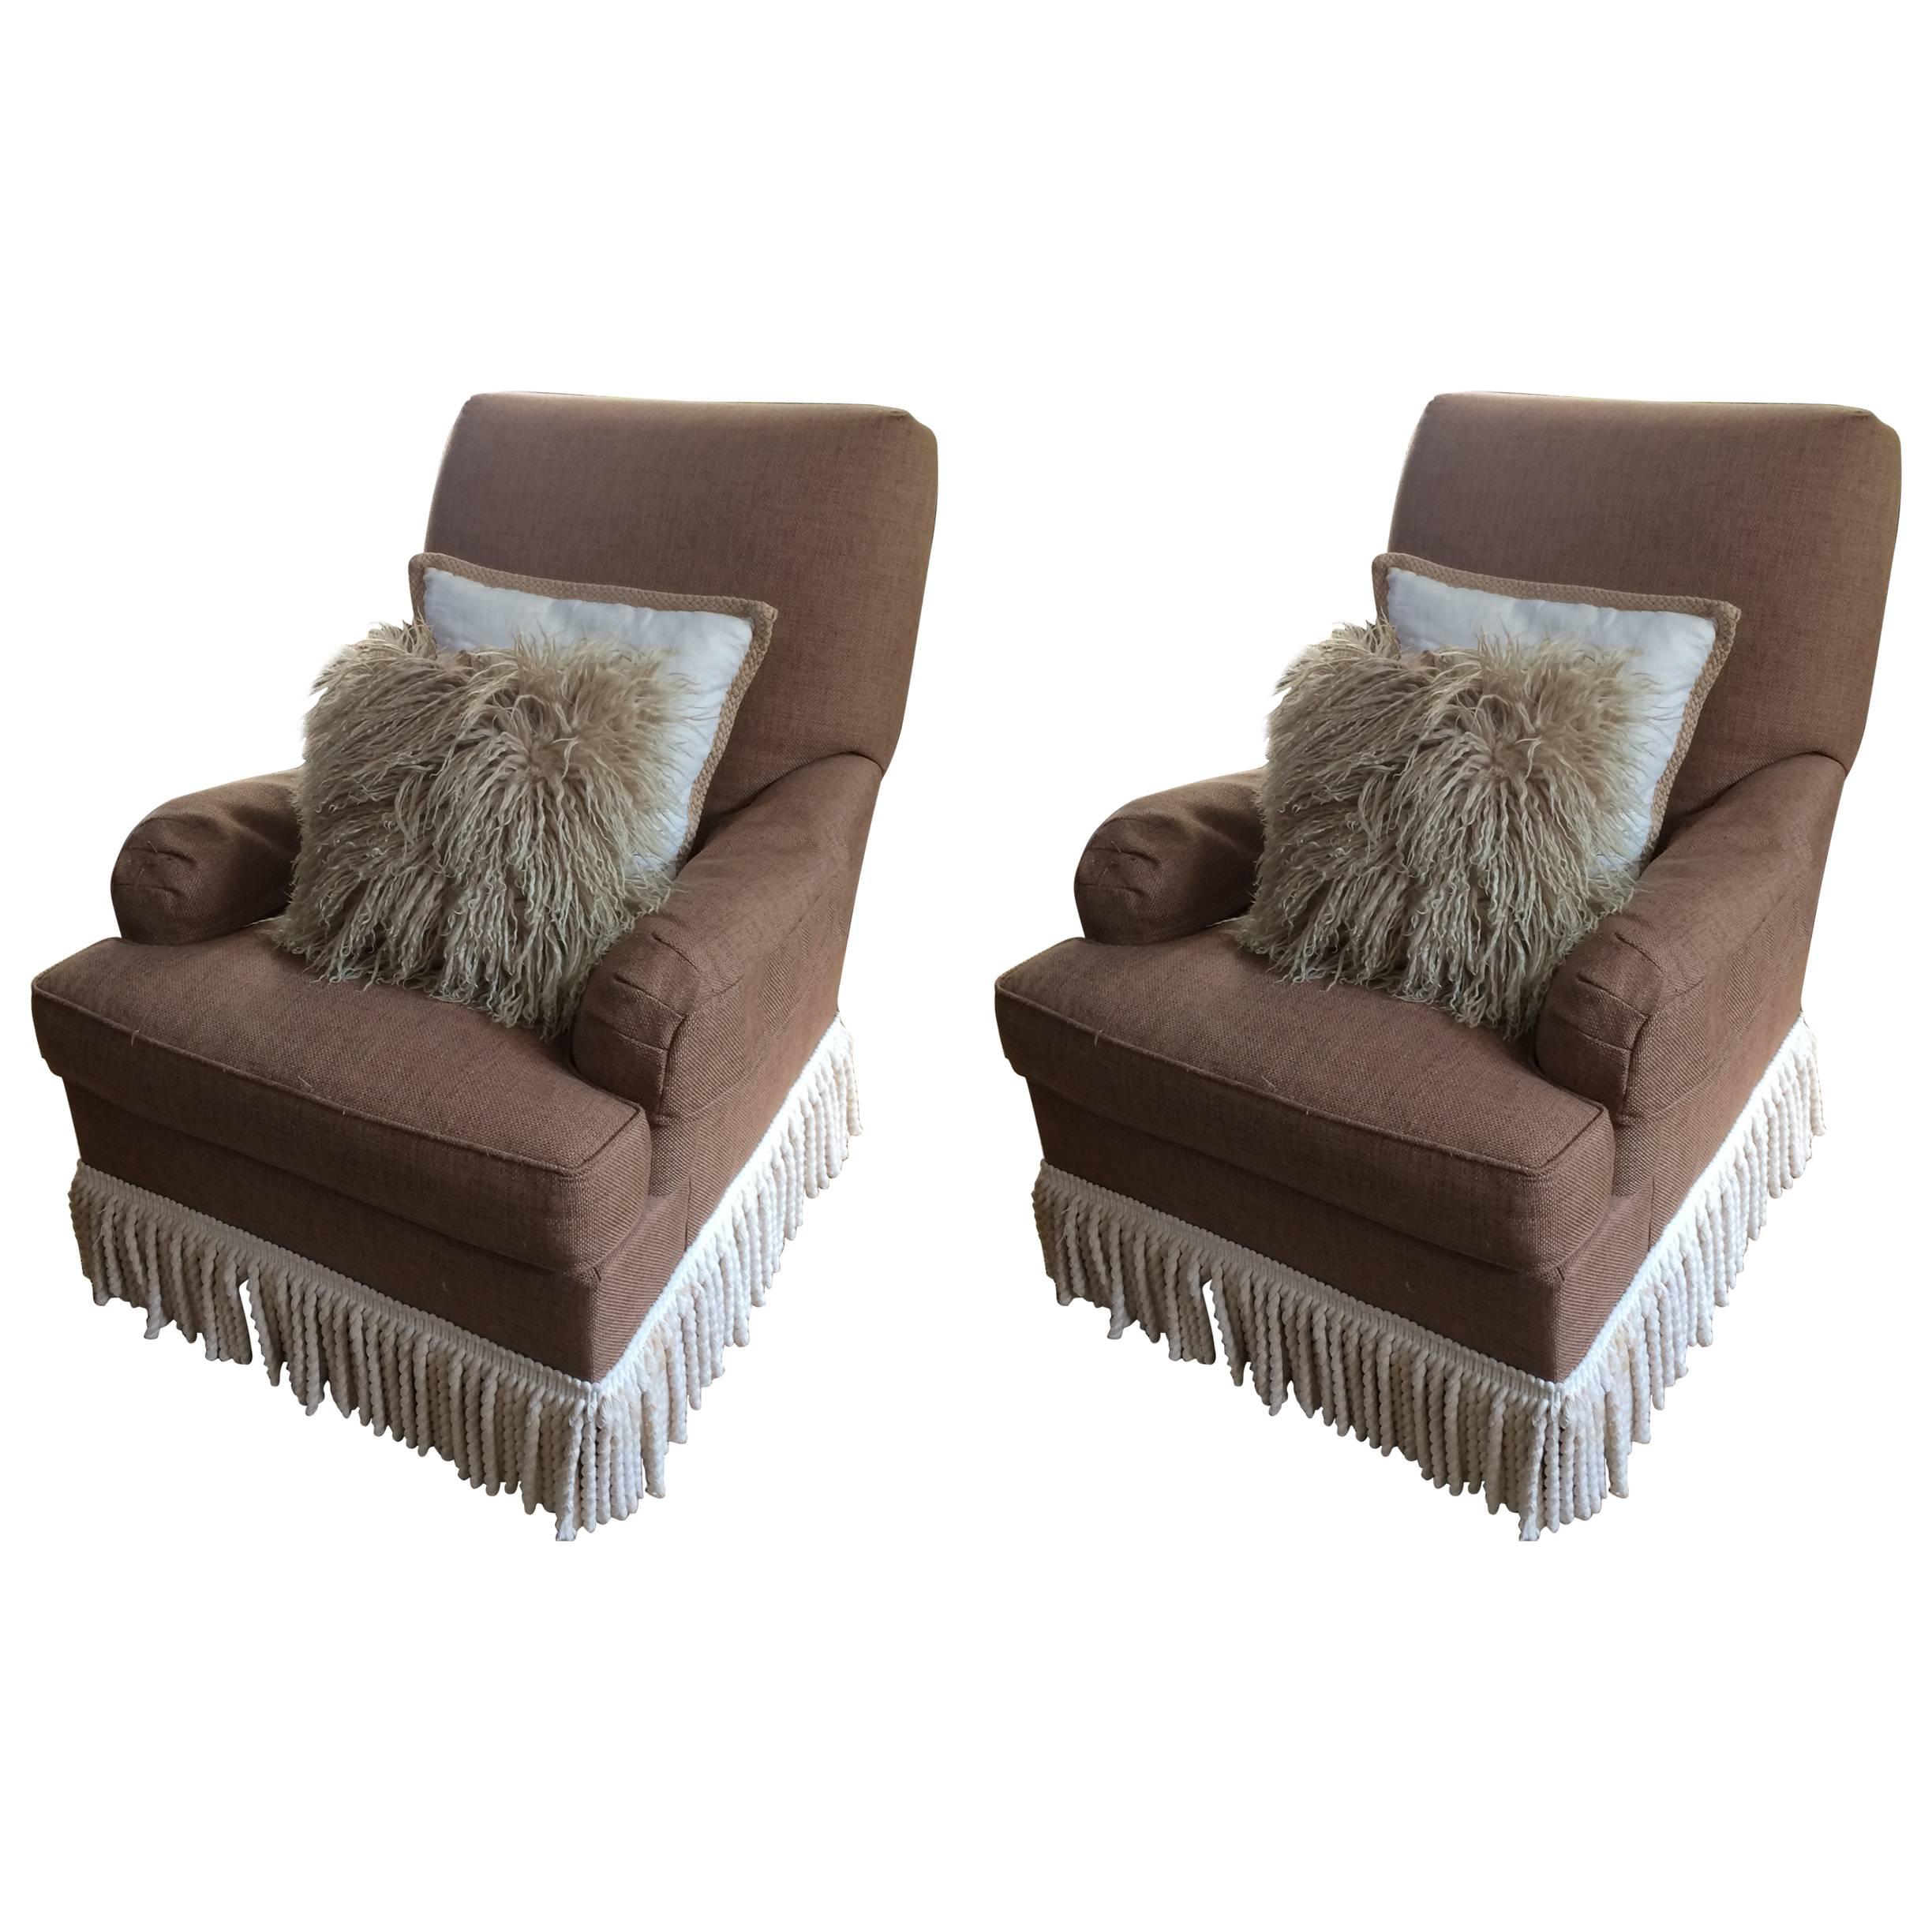 Pair of Large Luxurious Hickory Chair Club Chairs